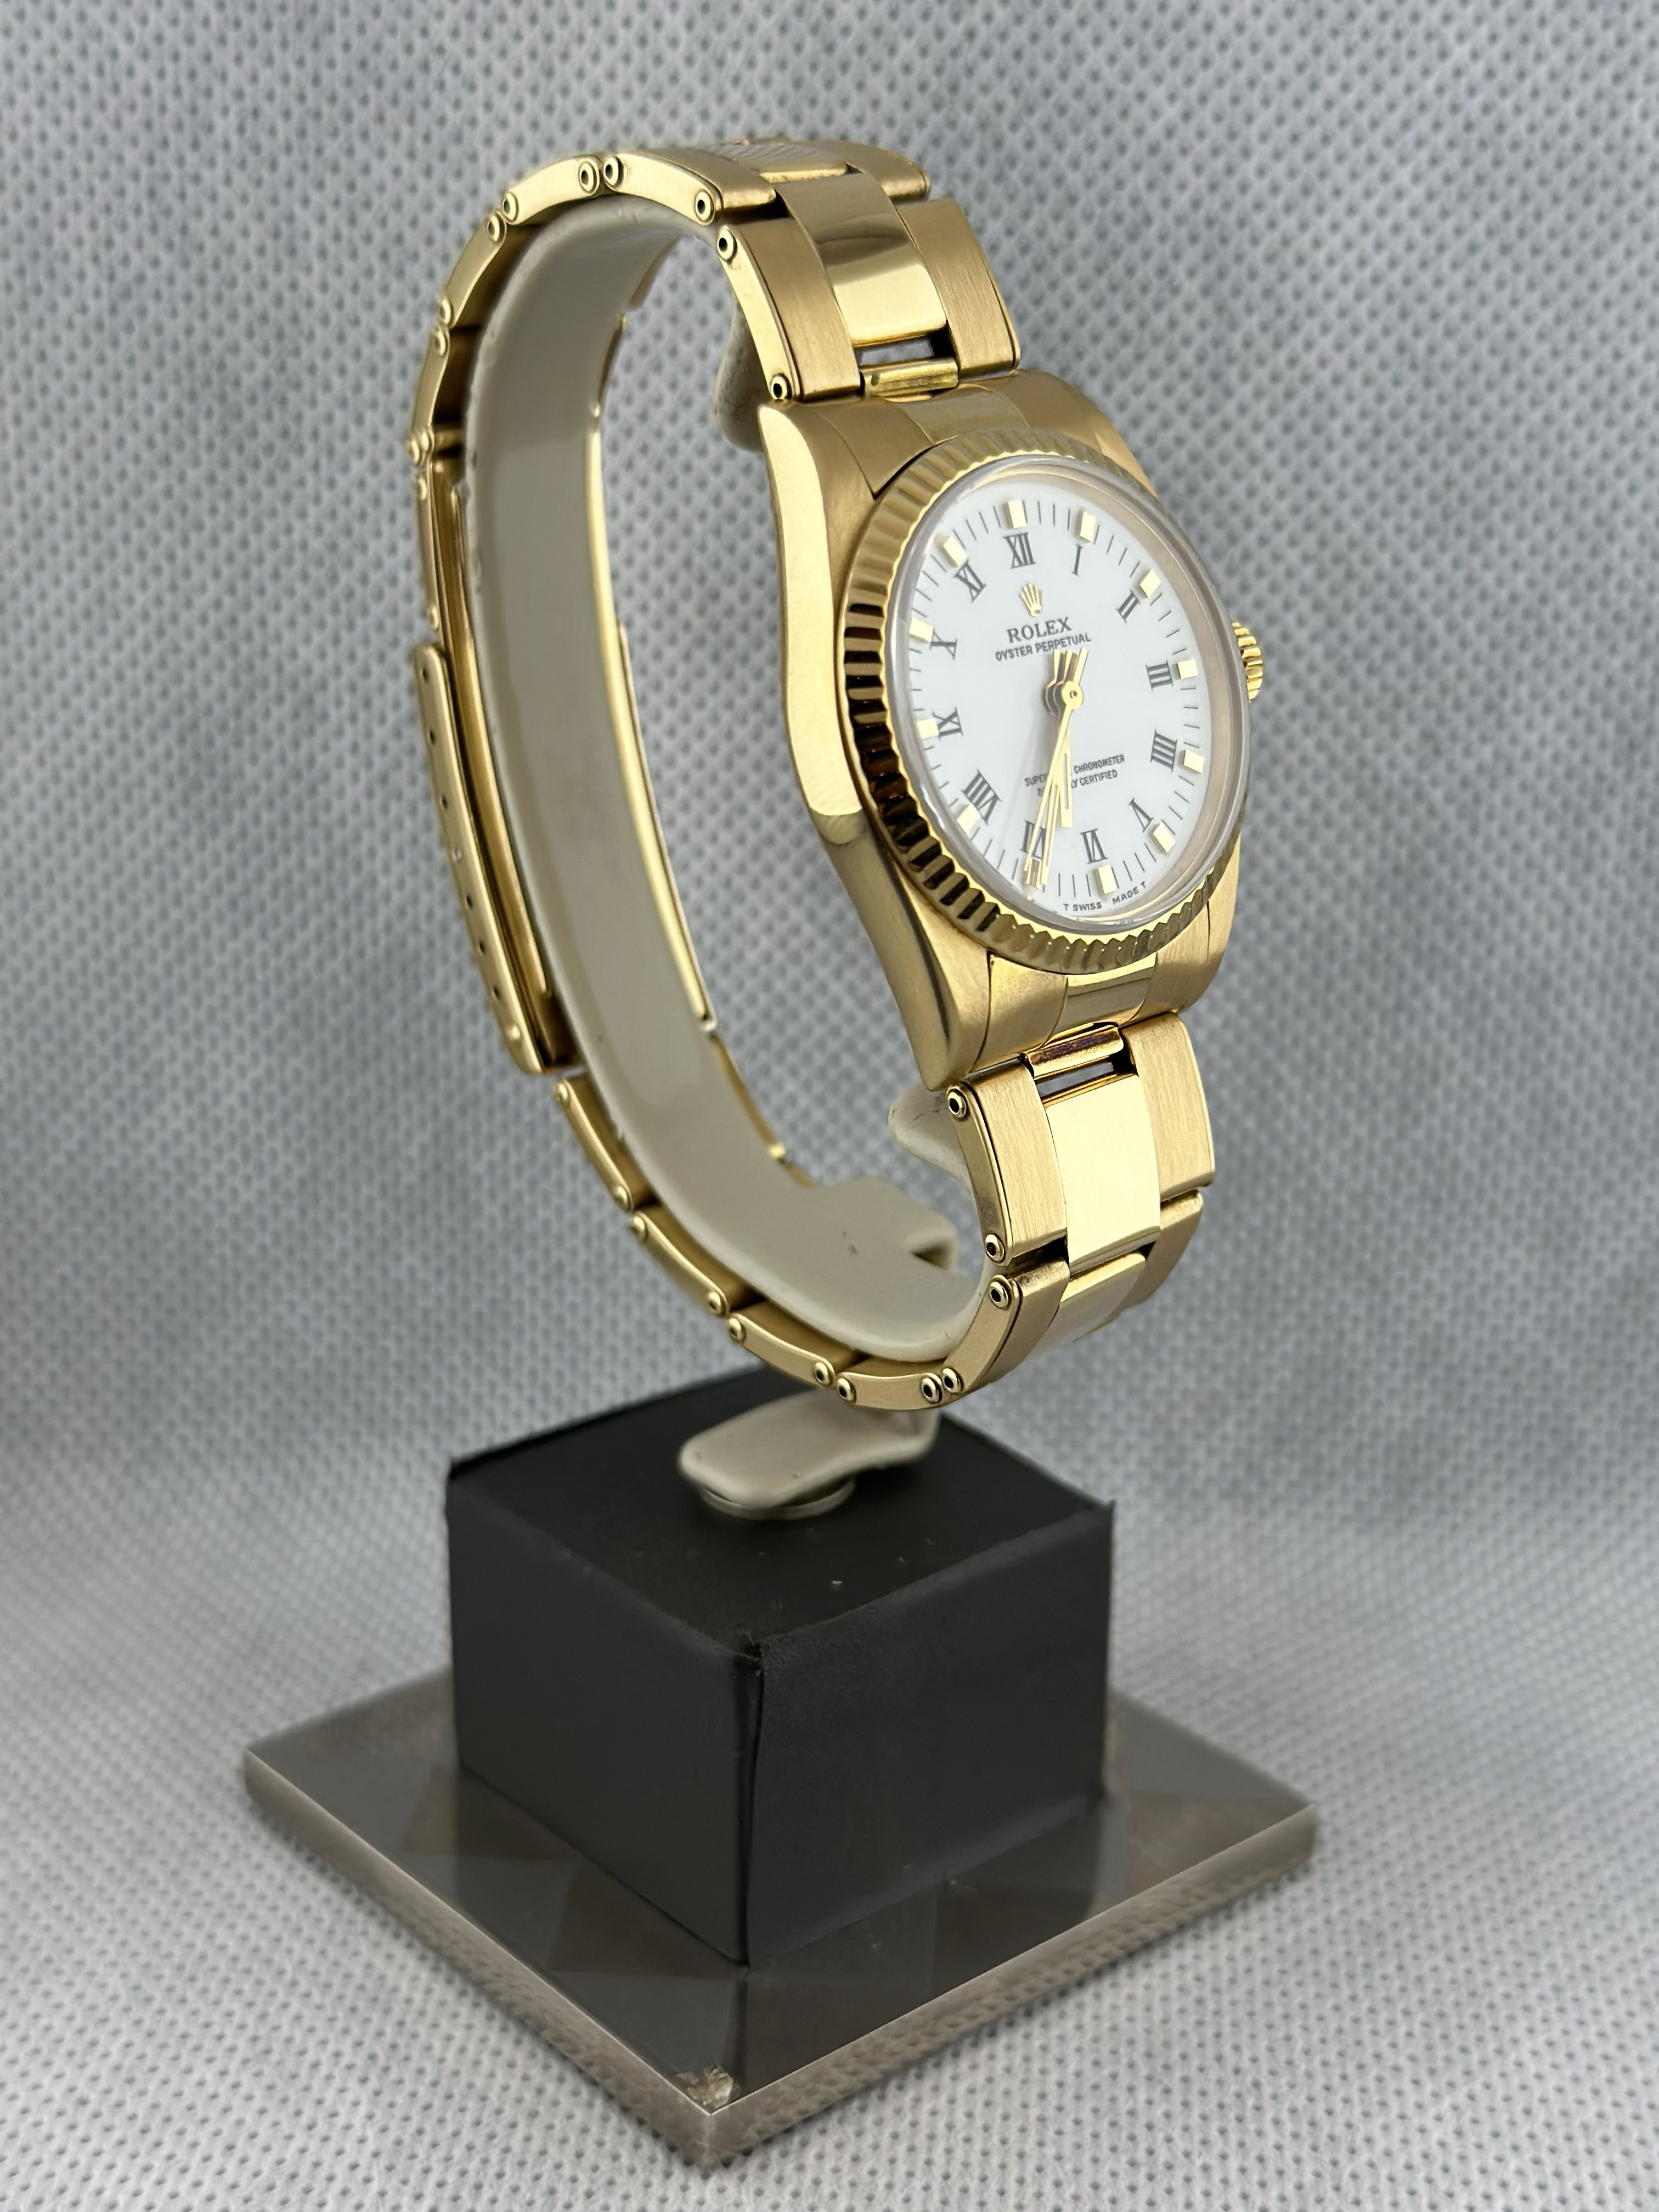 Rolex Oyster ref. 67518 | foto laterale